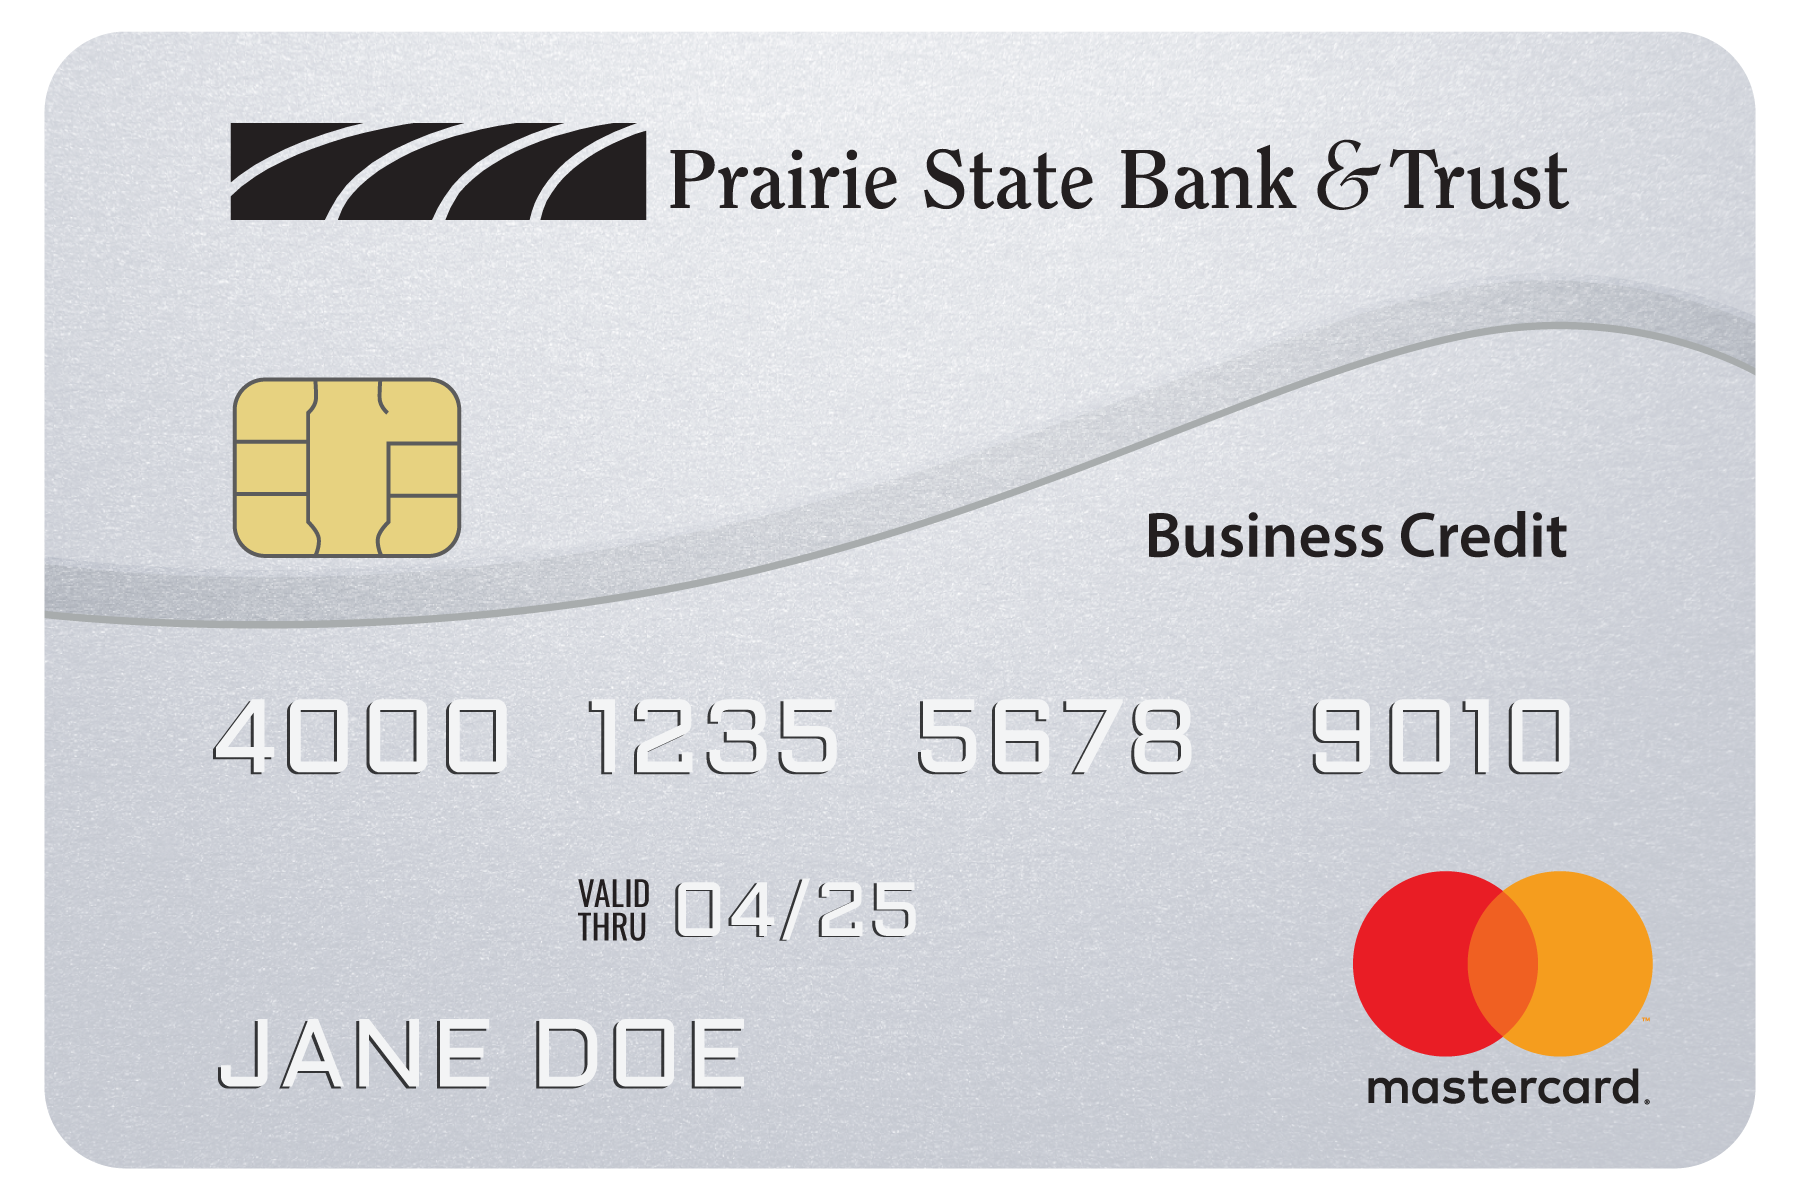 Prairie State Bank & Trust Business Credit Card